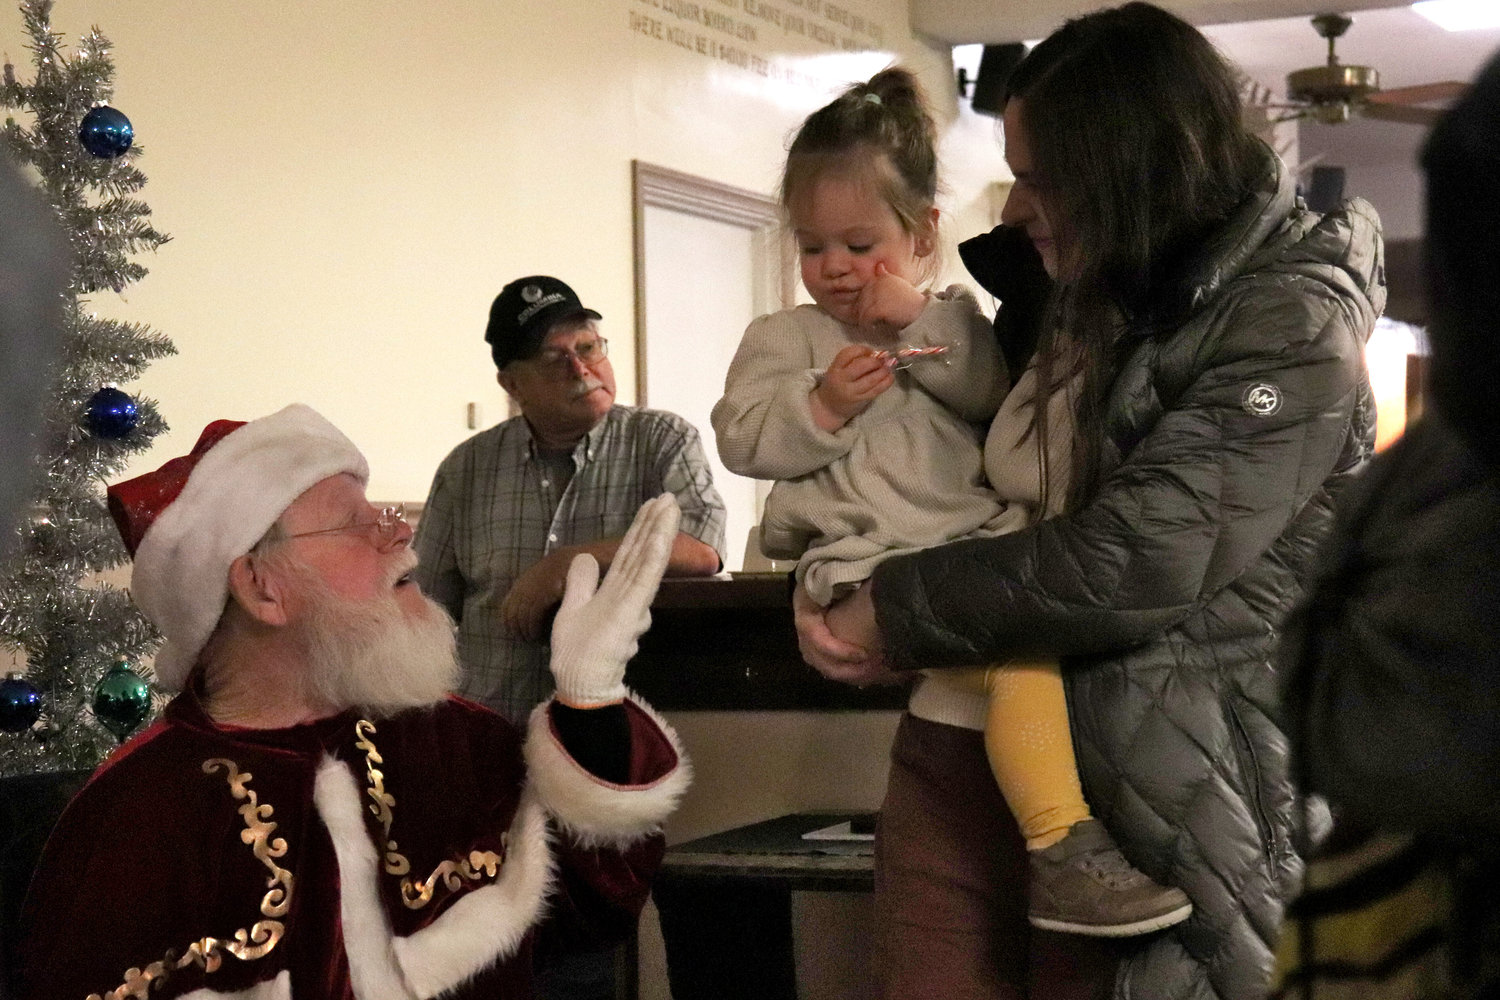 Santa blows a kiss to one-year-old Rylynn during a Breakfast with Santa event at the Moose Family Center in Centralia on Saturday.